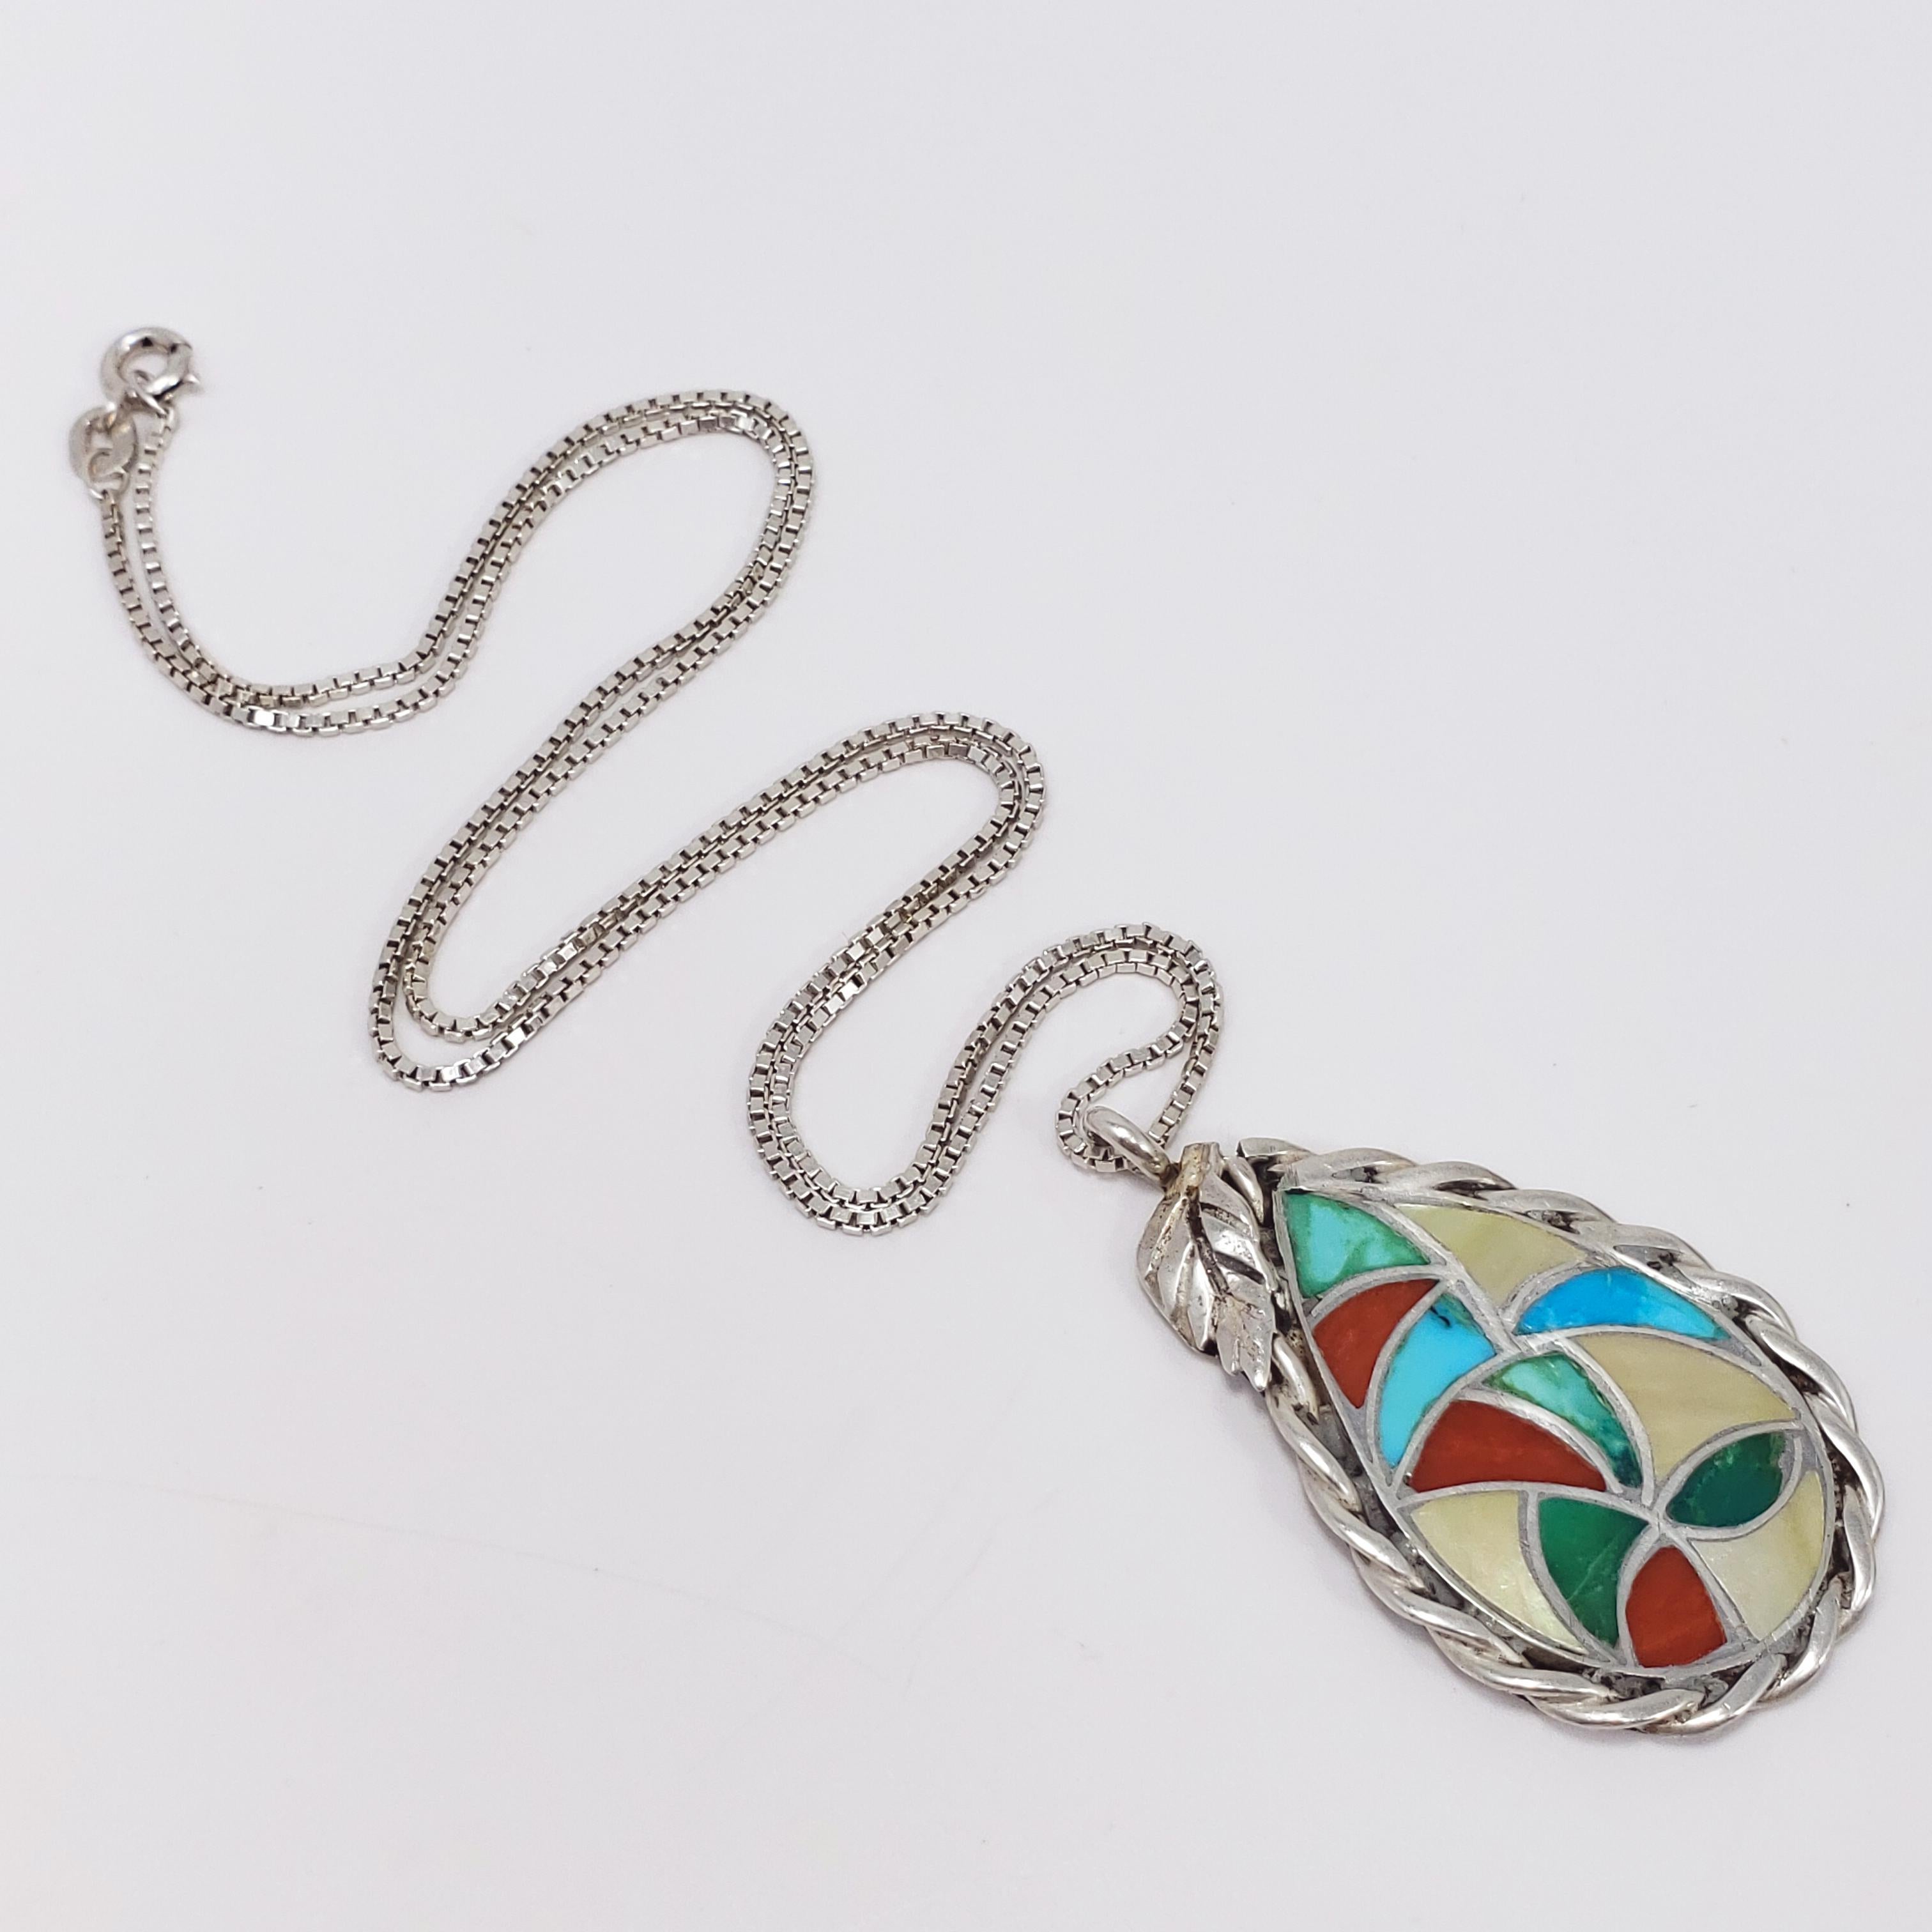 A colorful Native American Zuni pendant. Features coral, shell, and turquoise inlay in a tear-drop shaped sterling silver pendant. The weaved-strand bezel is accented with a single leaf on top. Comes with a complimentary matching sterling silver